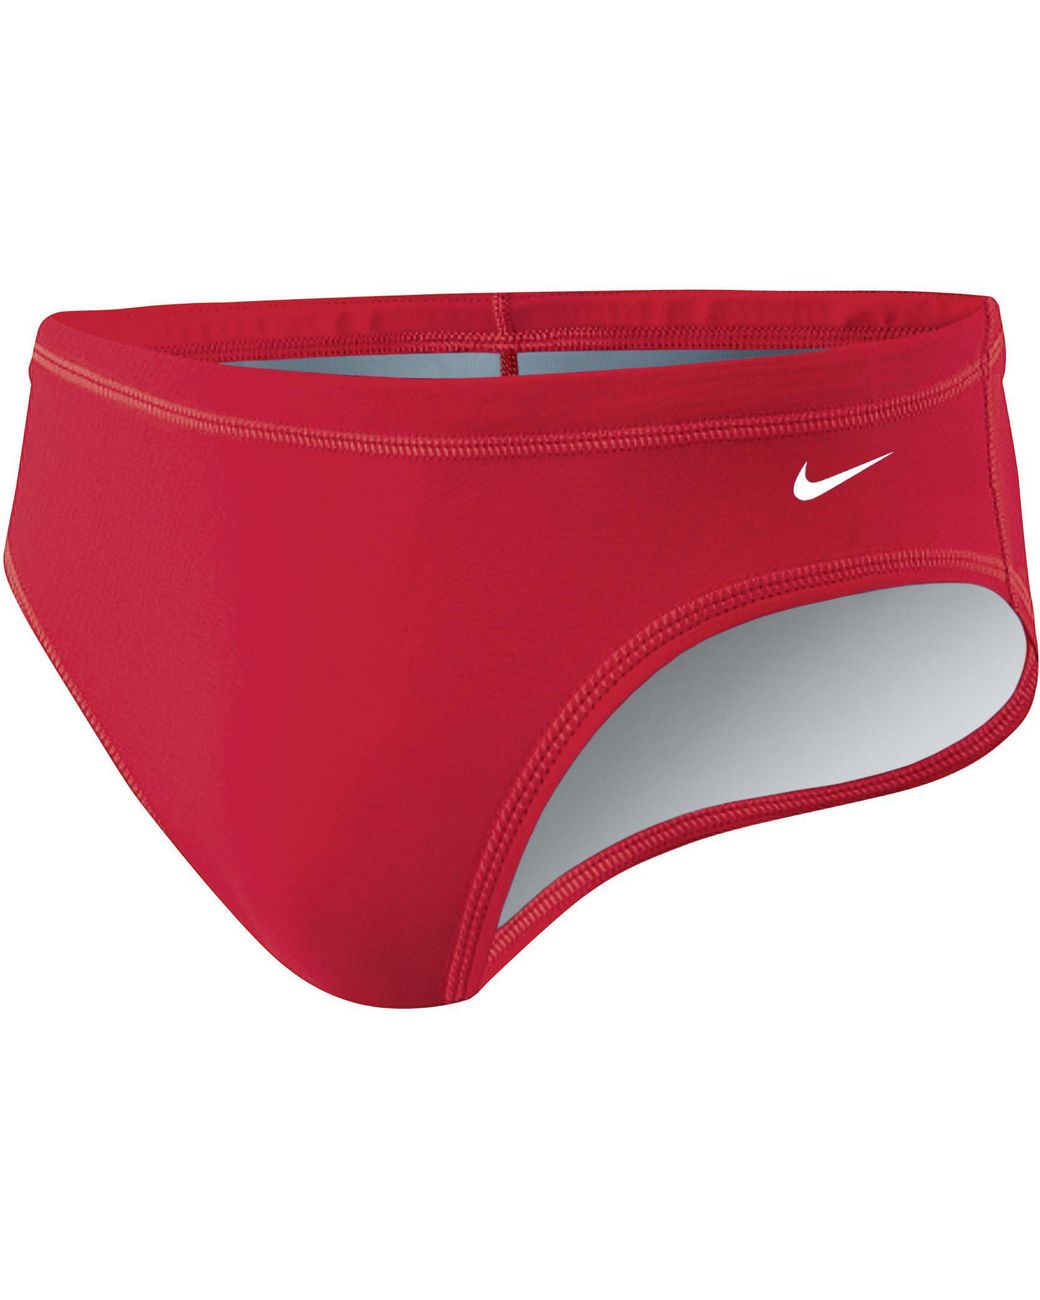 Nike Synthetic Poly Core Brief in University Red (Red) for Men - Lyst